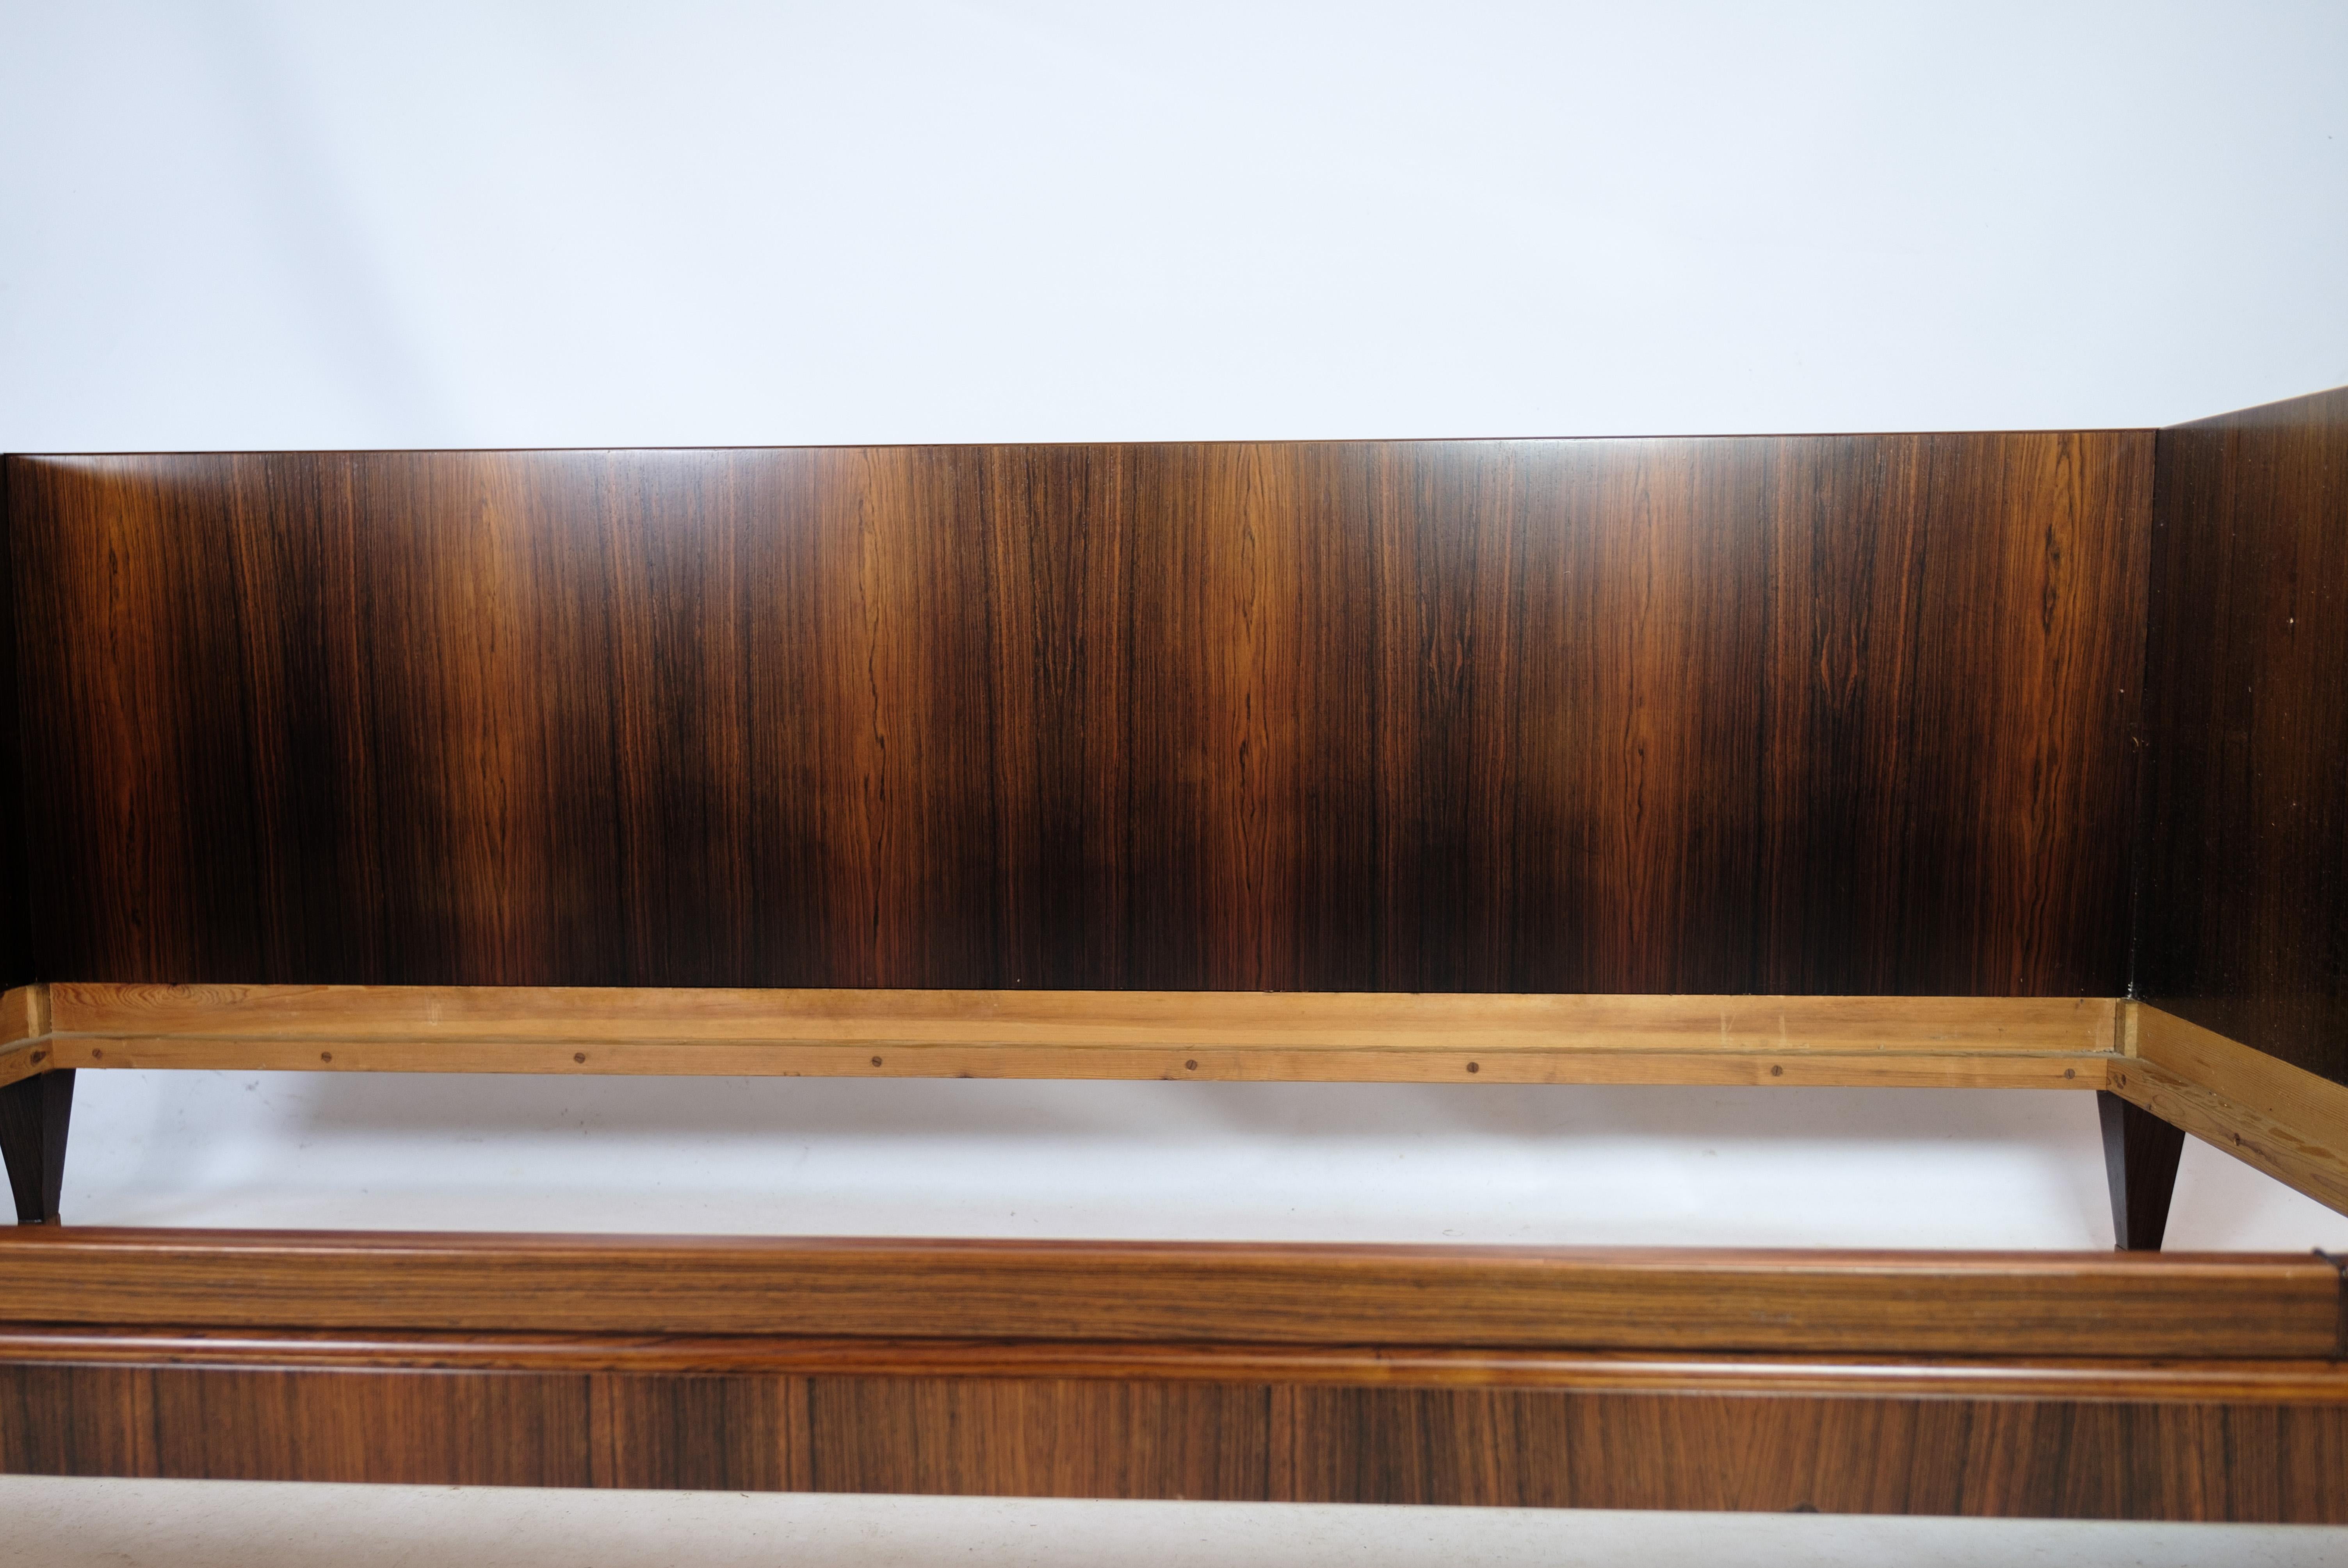 Bed of veneered rosewood of Danish design from around the 1960s. Is in very good condition.
Measurements in cm: H:74.5 W:200 D:98 - 2 pcs in stock.